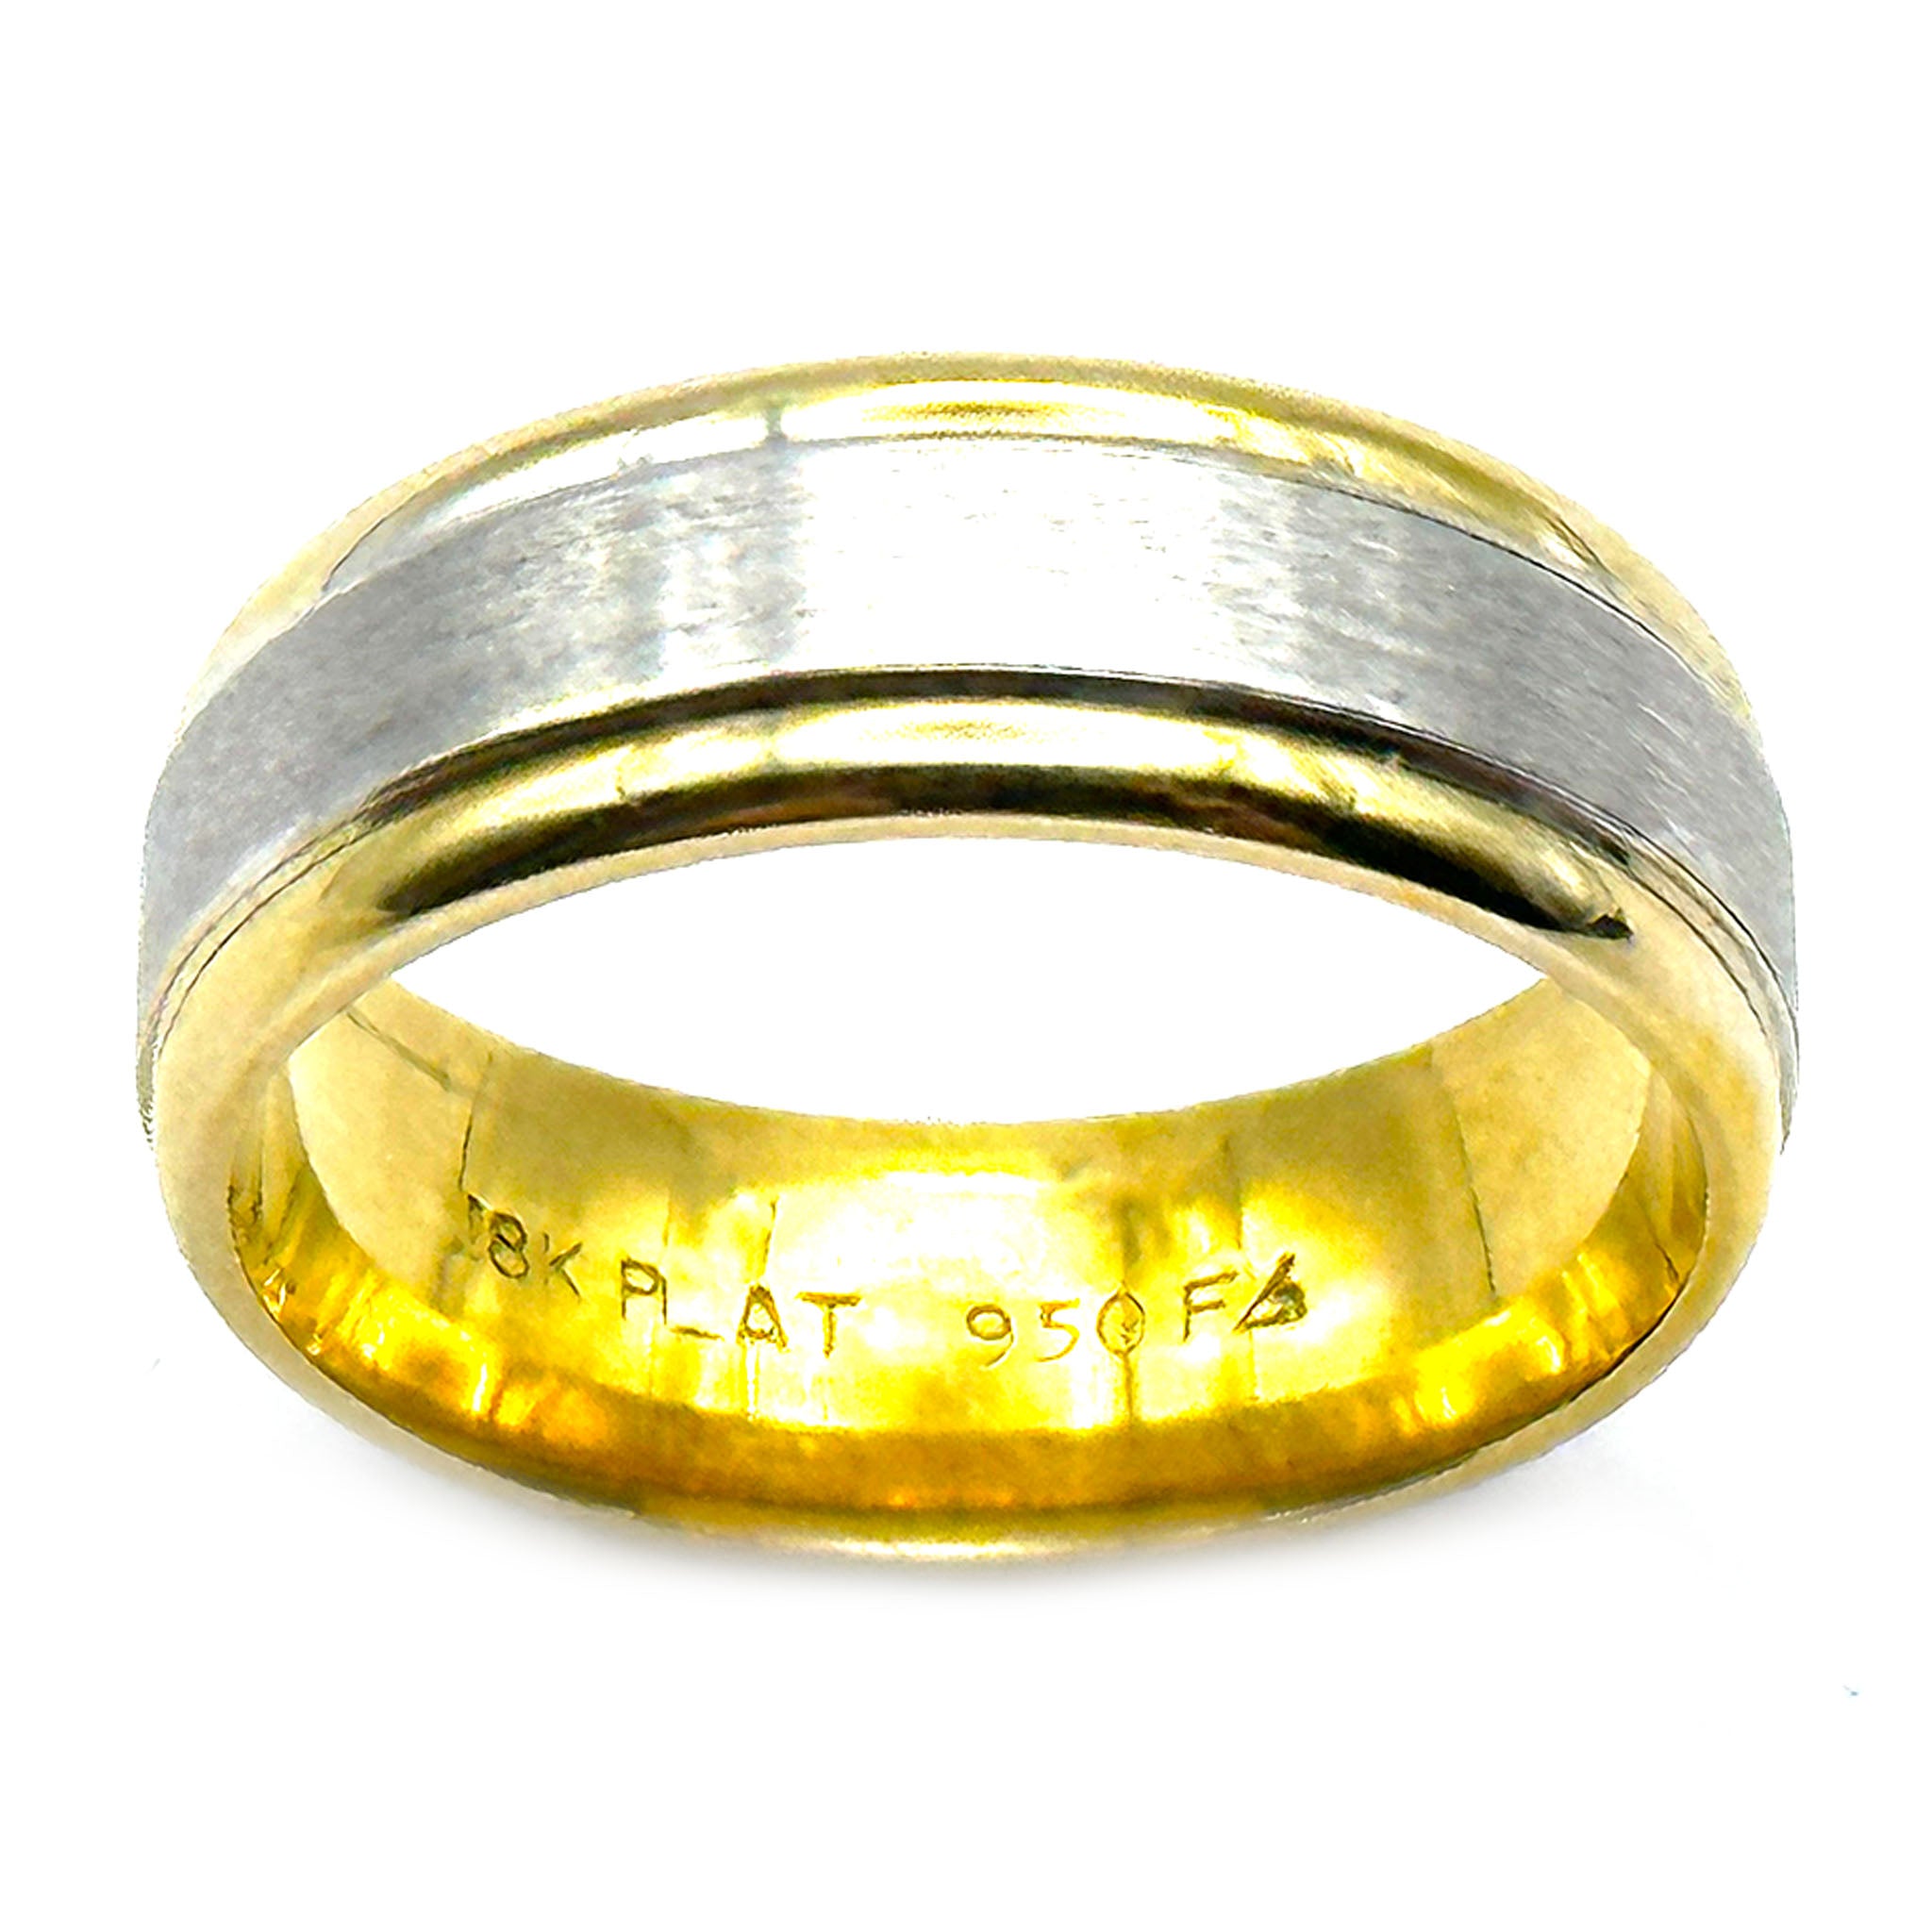 $2800 18Kt Yellow Gold and Platinum 6mm Women's Wedding Band Ring